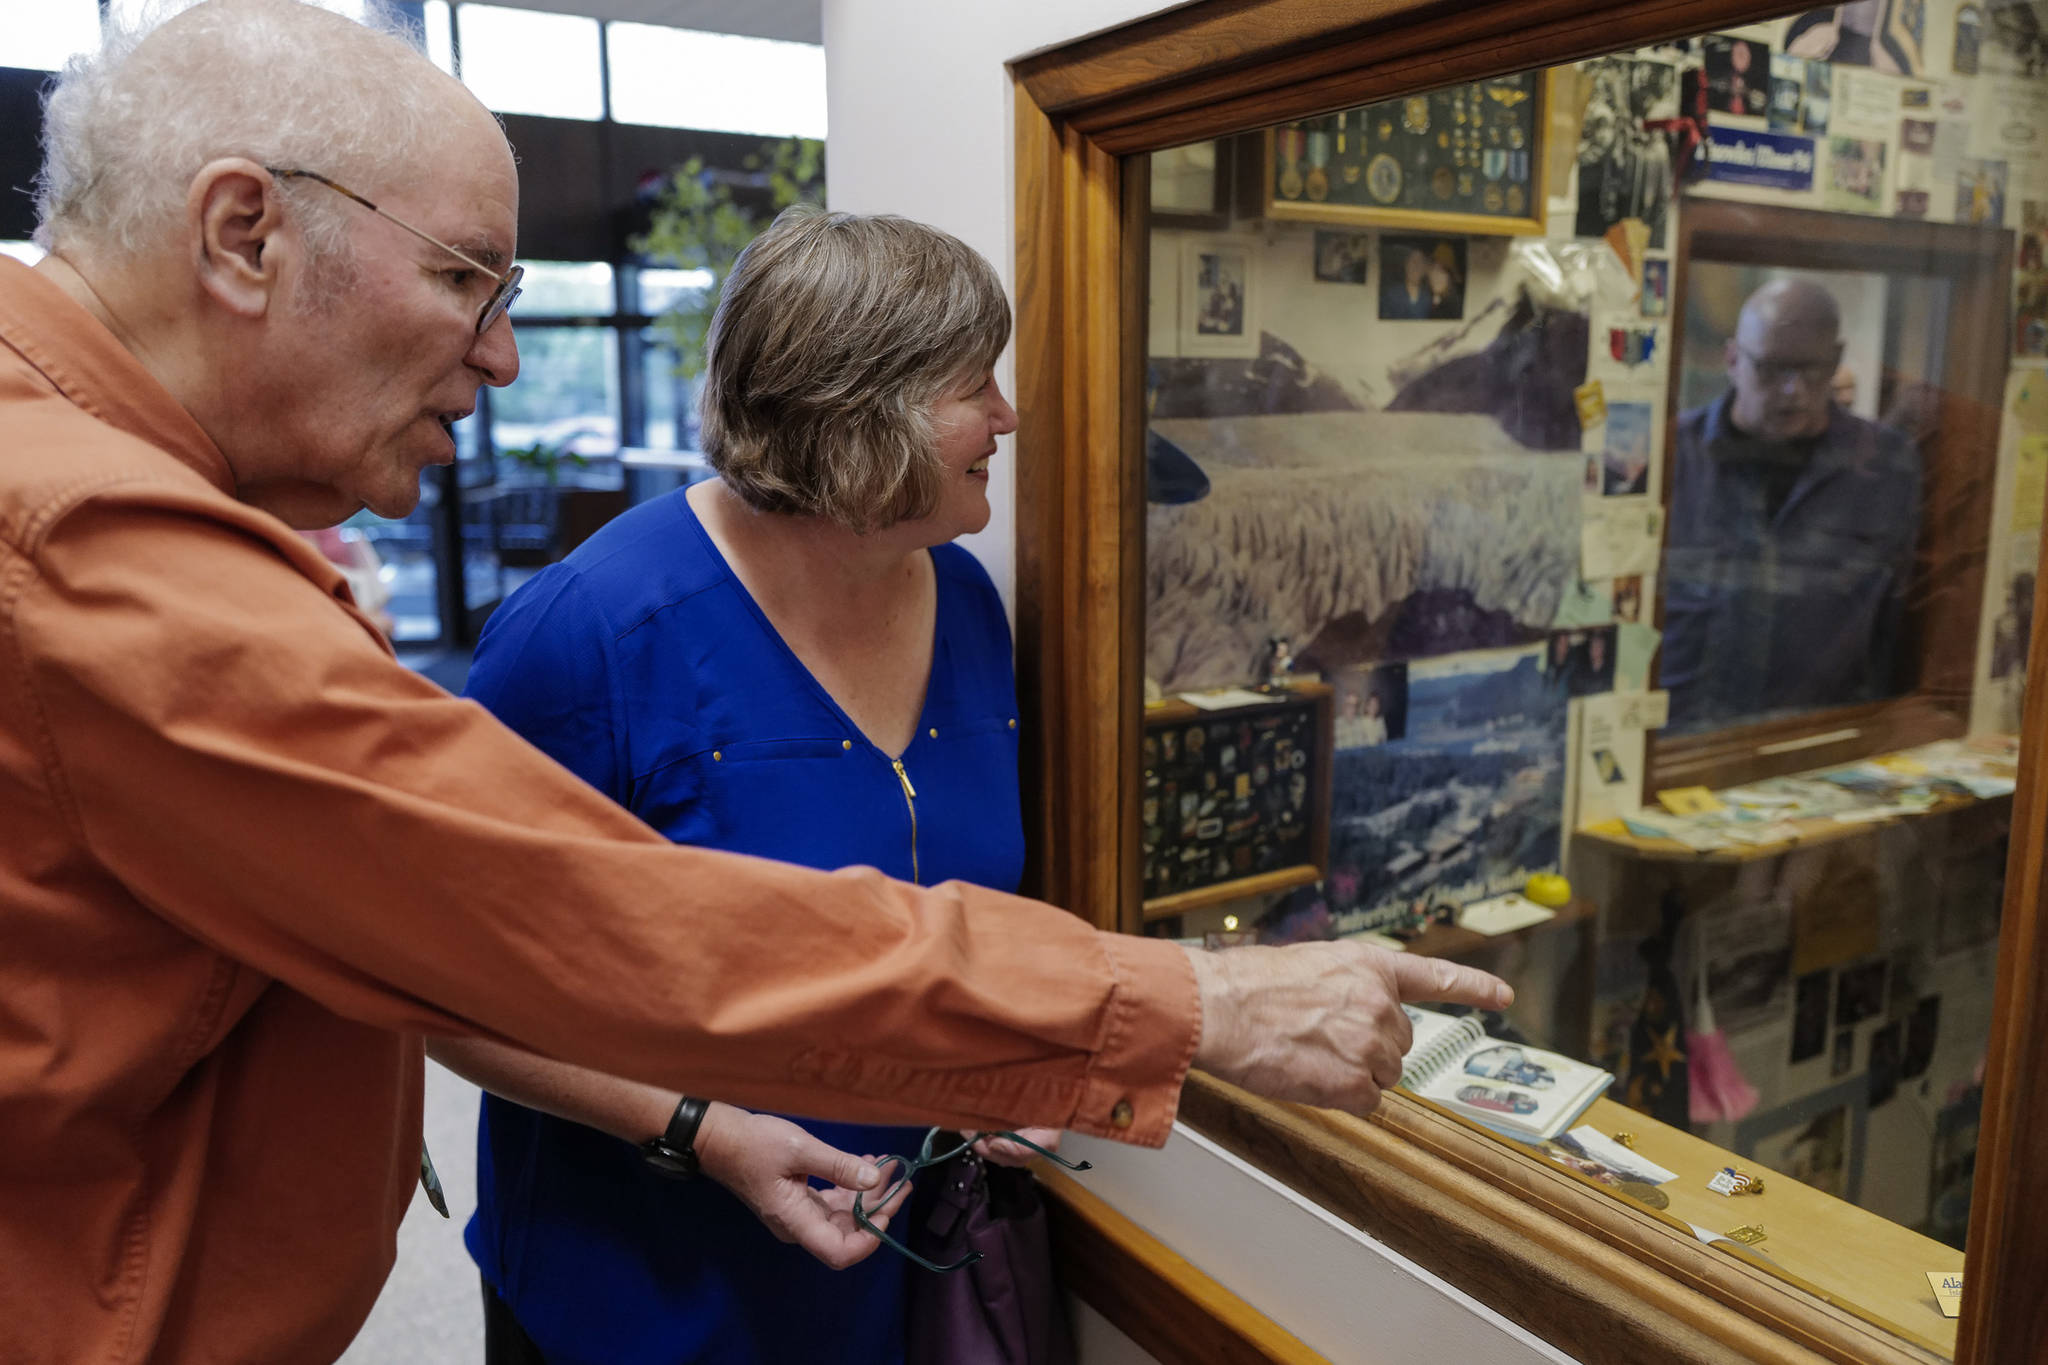 Michael Orelove, left, talks with Rep. Sara Hannan, D-Juneau, as they look at items on the 25th anniversary of the 1994 Juneau Time Capsule at the Hurff Ackerman Saunders Federal Building in Juneau on Friday, Aug. 9, 2019. Mark Farmer, right, looks in through a second window. Ovelove was on the committee that set up the capsule which is set to be opened at the 100 year mark. (Michael Penn | Juneau Empire)